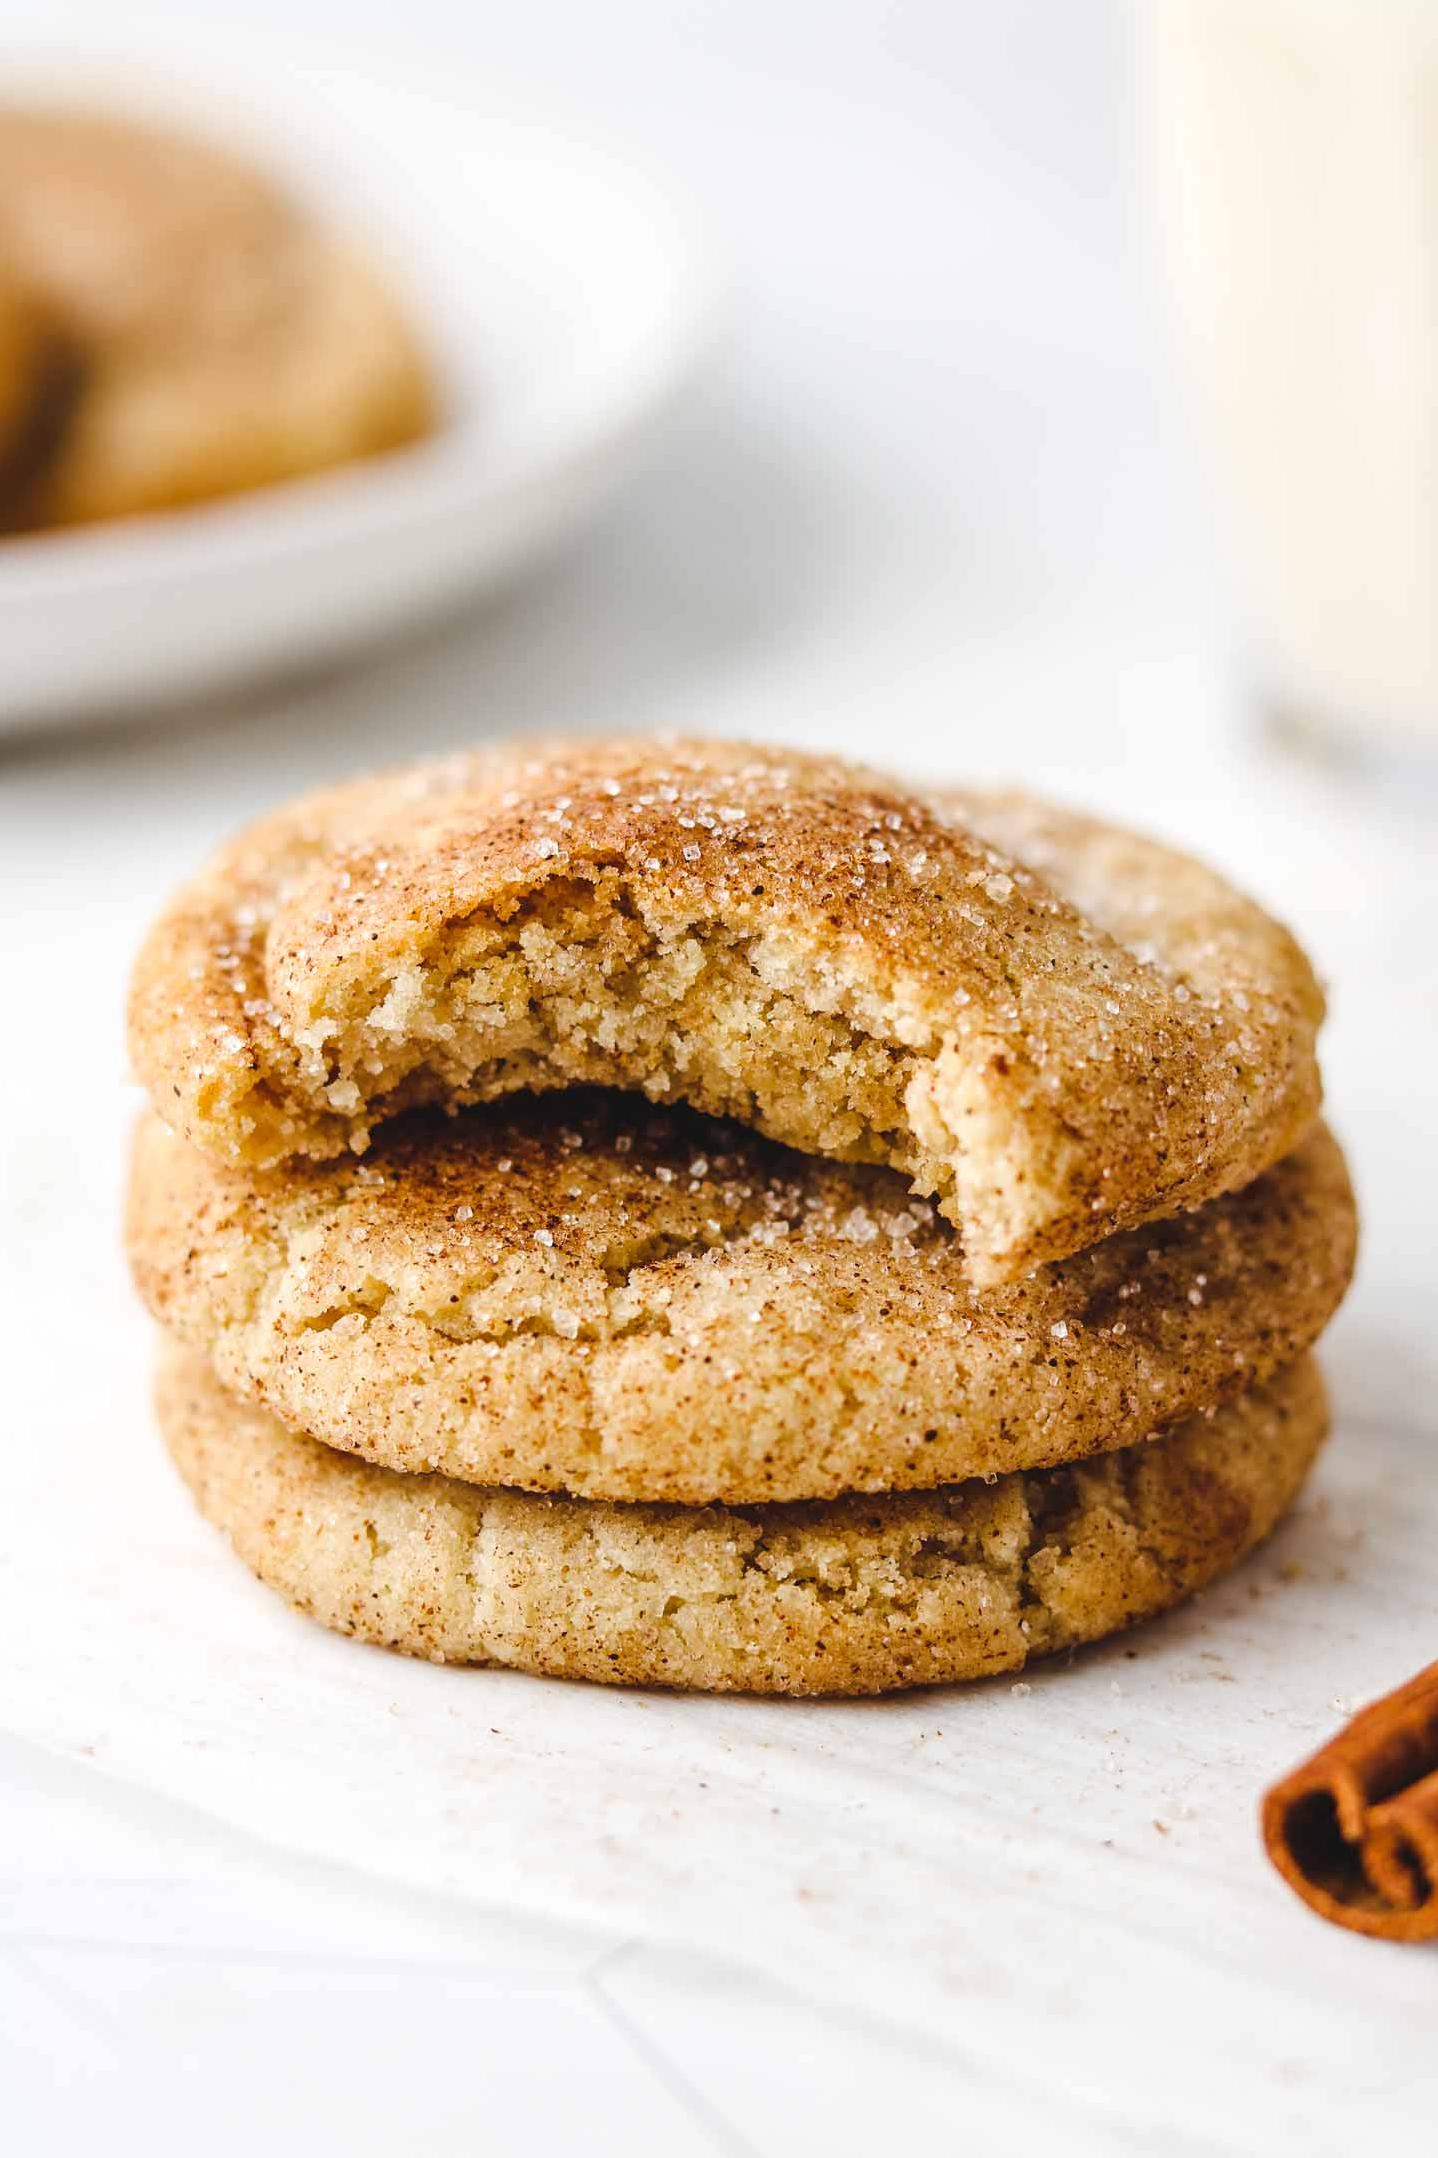  Who says healthy snacks can't be delicious? Try these oatmeal snickerdoodles and see for yourself!